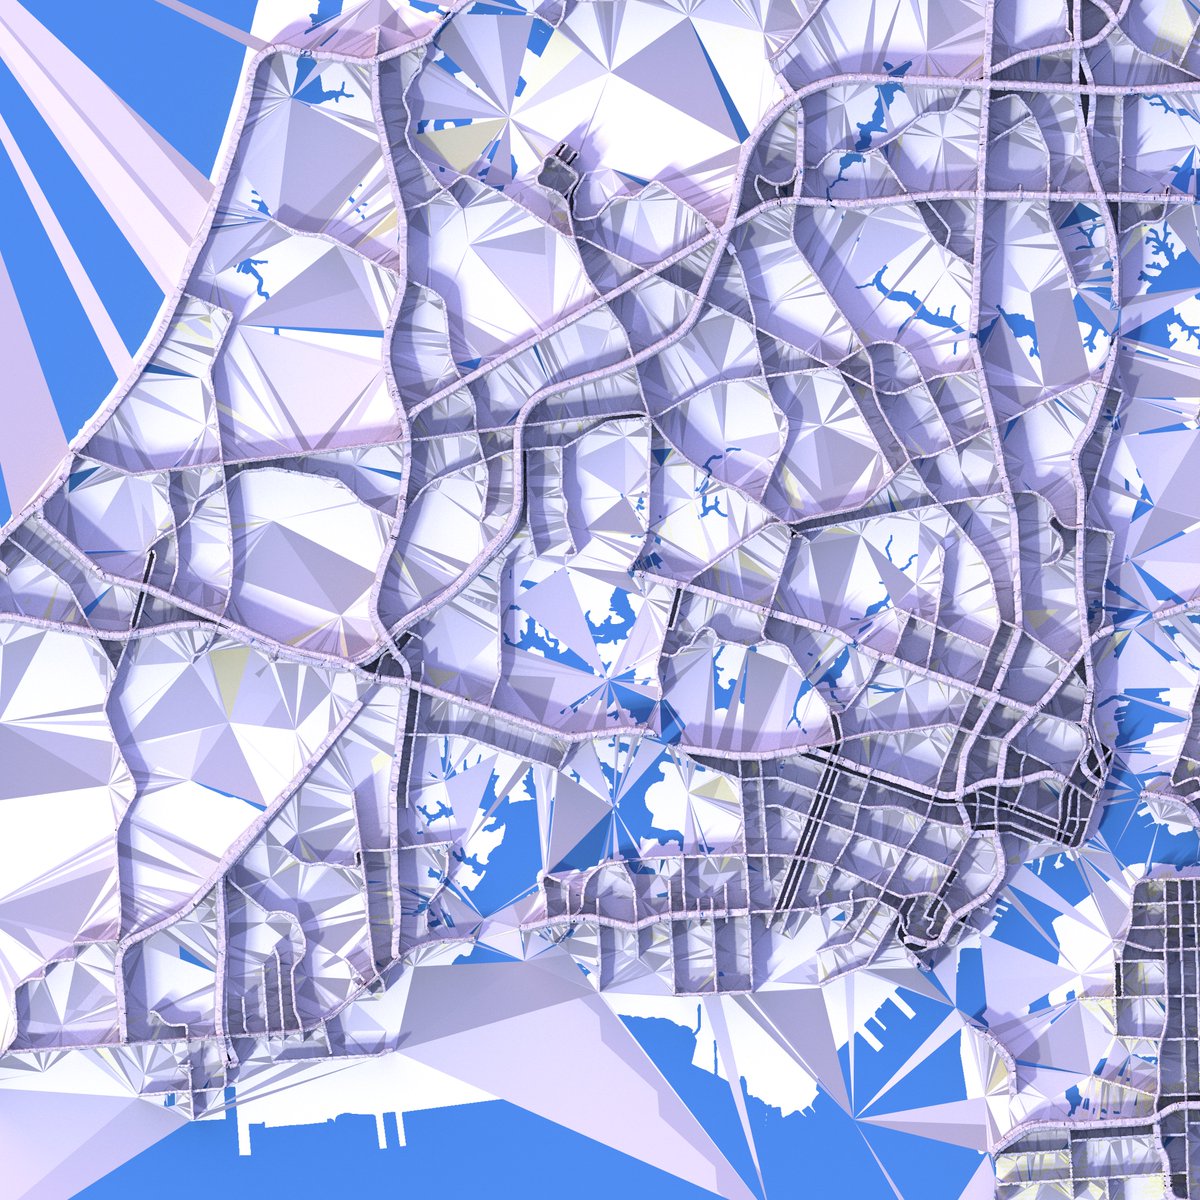 This is what happens when one overexaggerates in `plot_gg`. :P 

Can you guess the city?

#rayshader adventures in #accidentalaRt, an #rstats tale